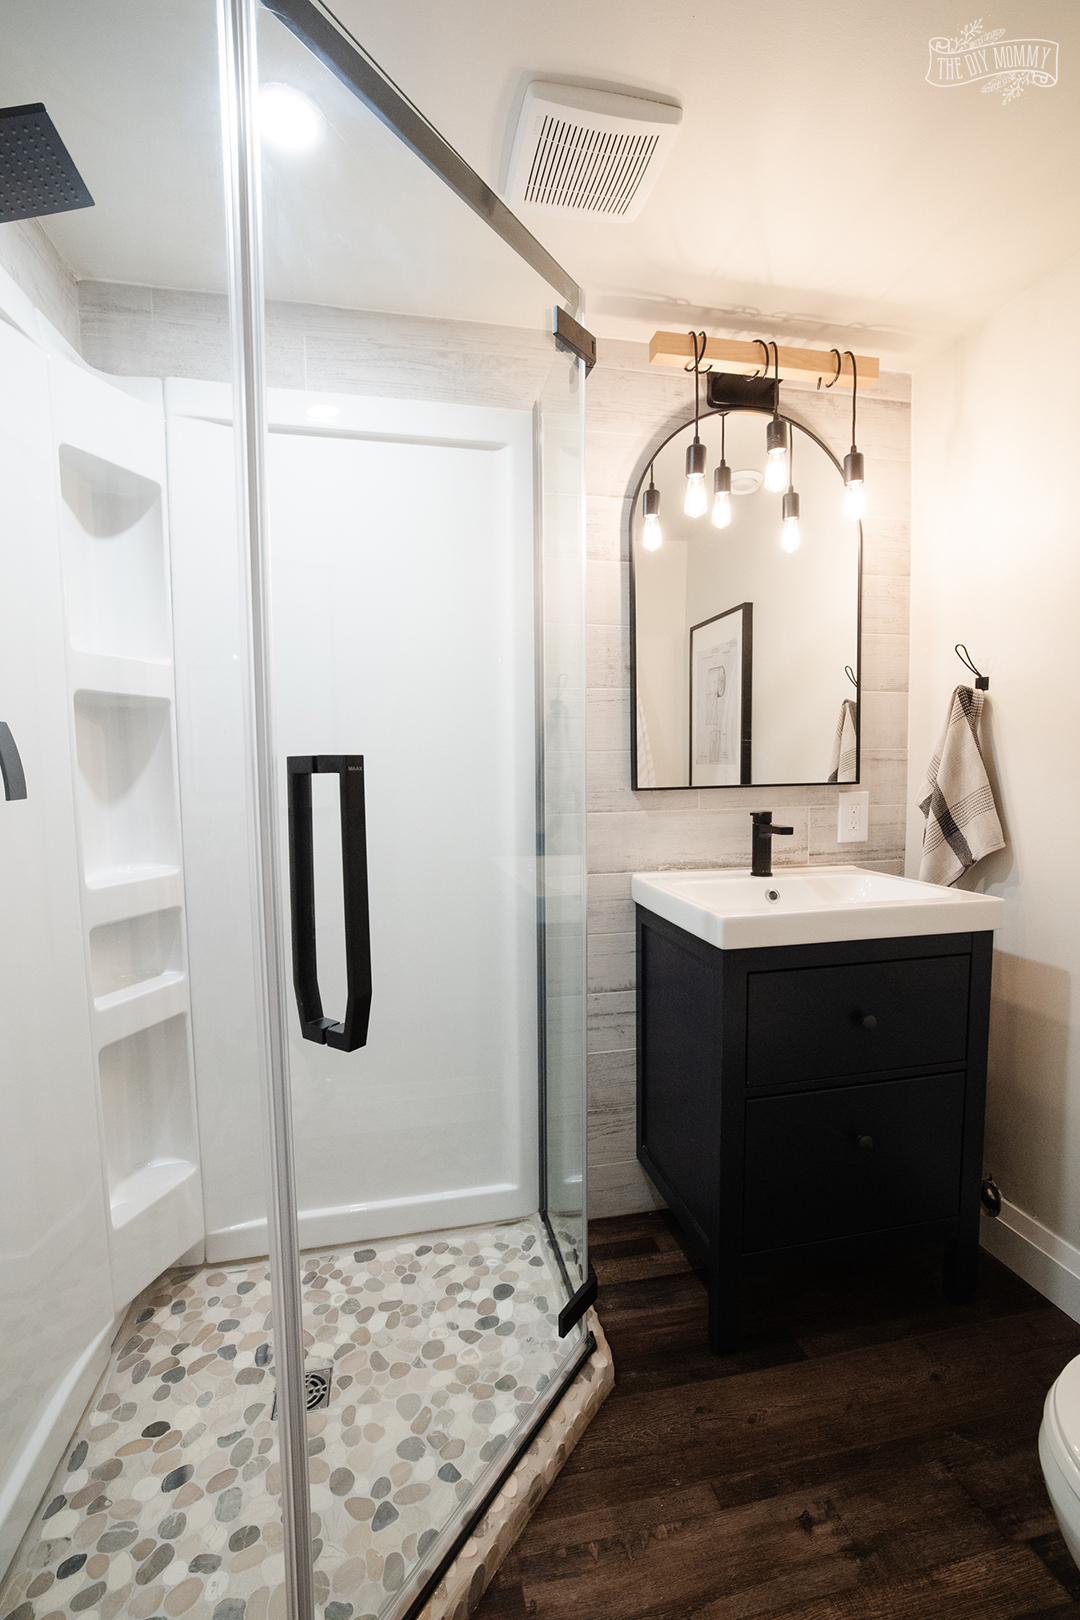 Before & After: Basement Storage Closet to Tiny Bathroom!